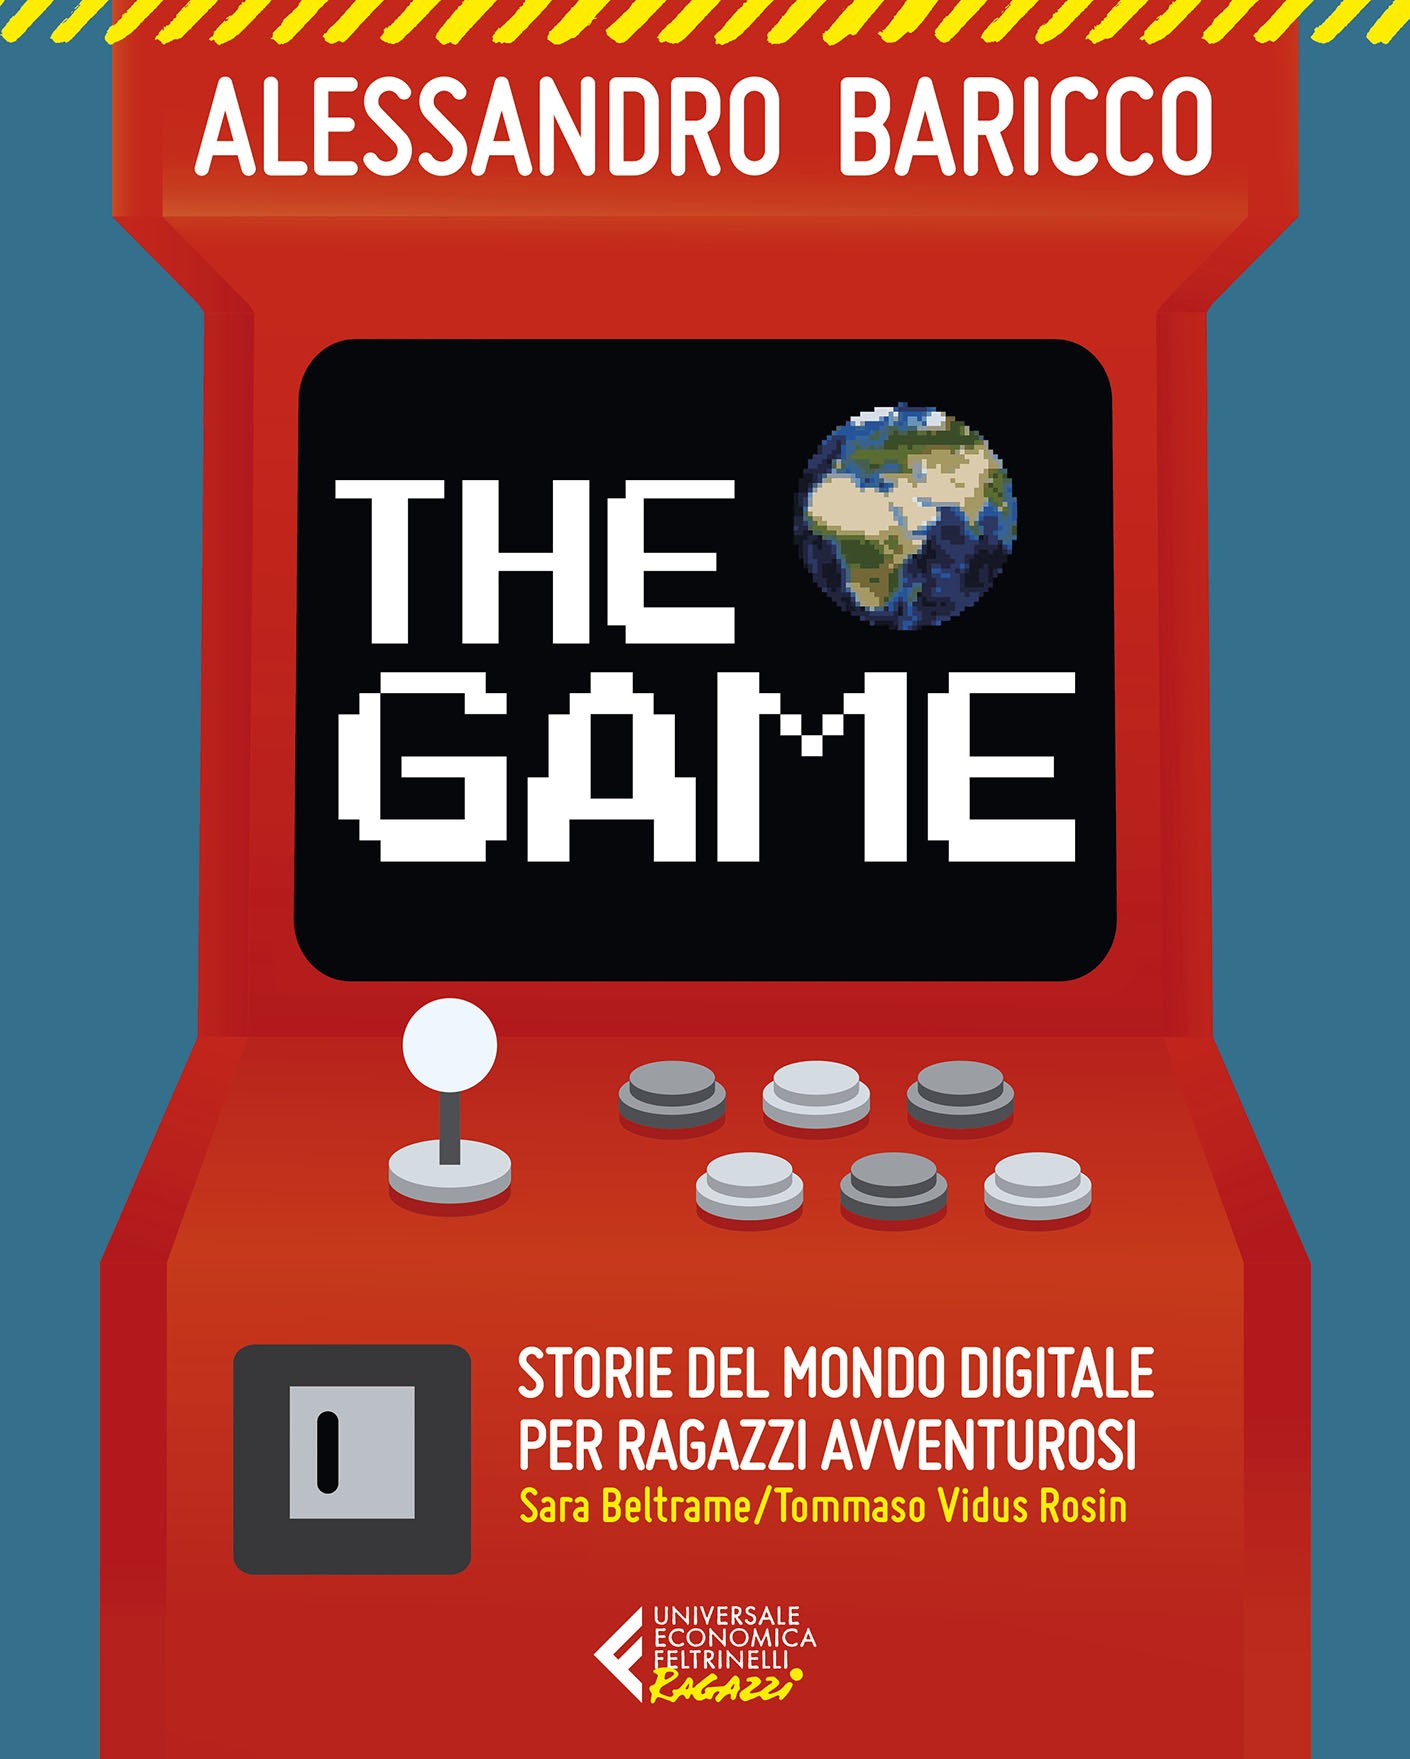 The Game - Librerie.coop